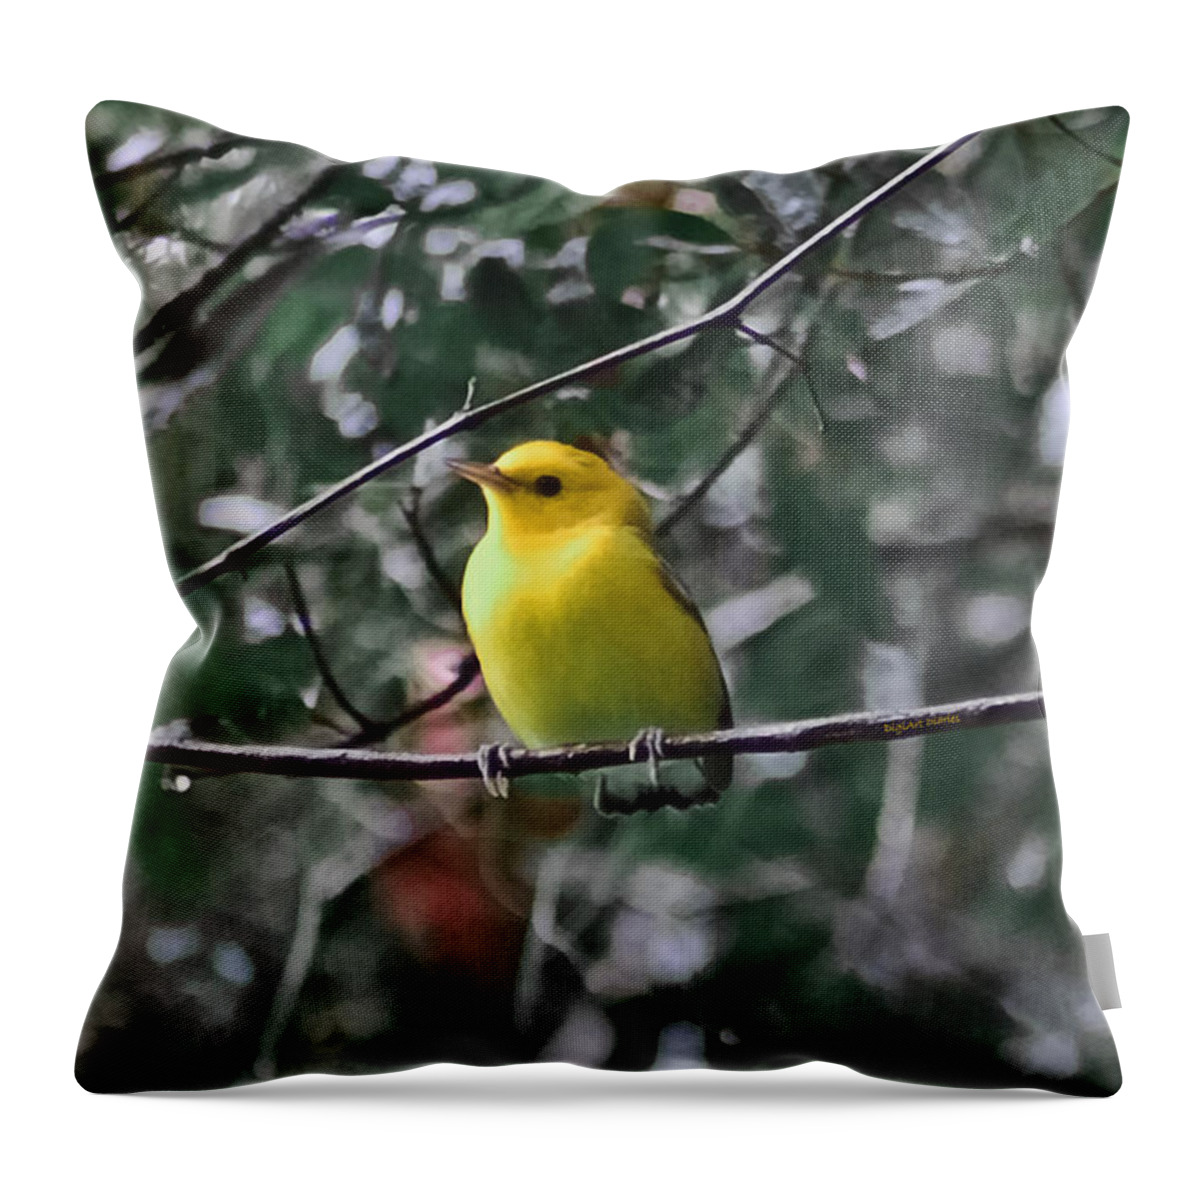 Bird Throw Pillow featuring the photograph Yellow Songbird by DigiArt Diaries by Vicky B Fuller